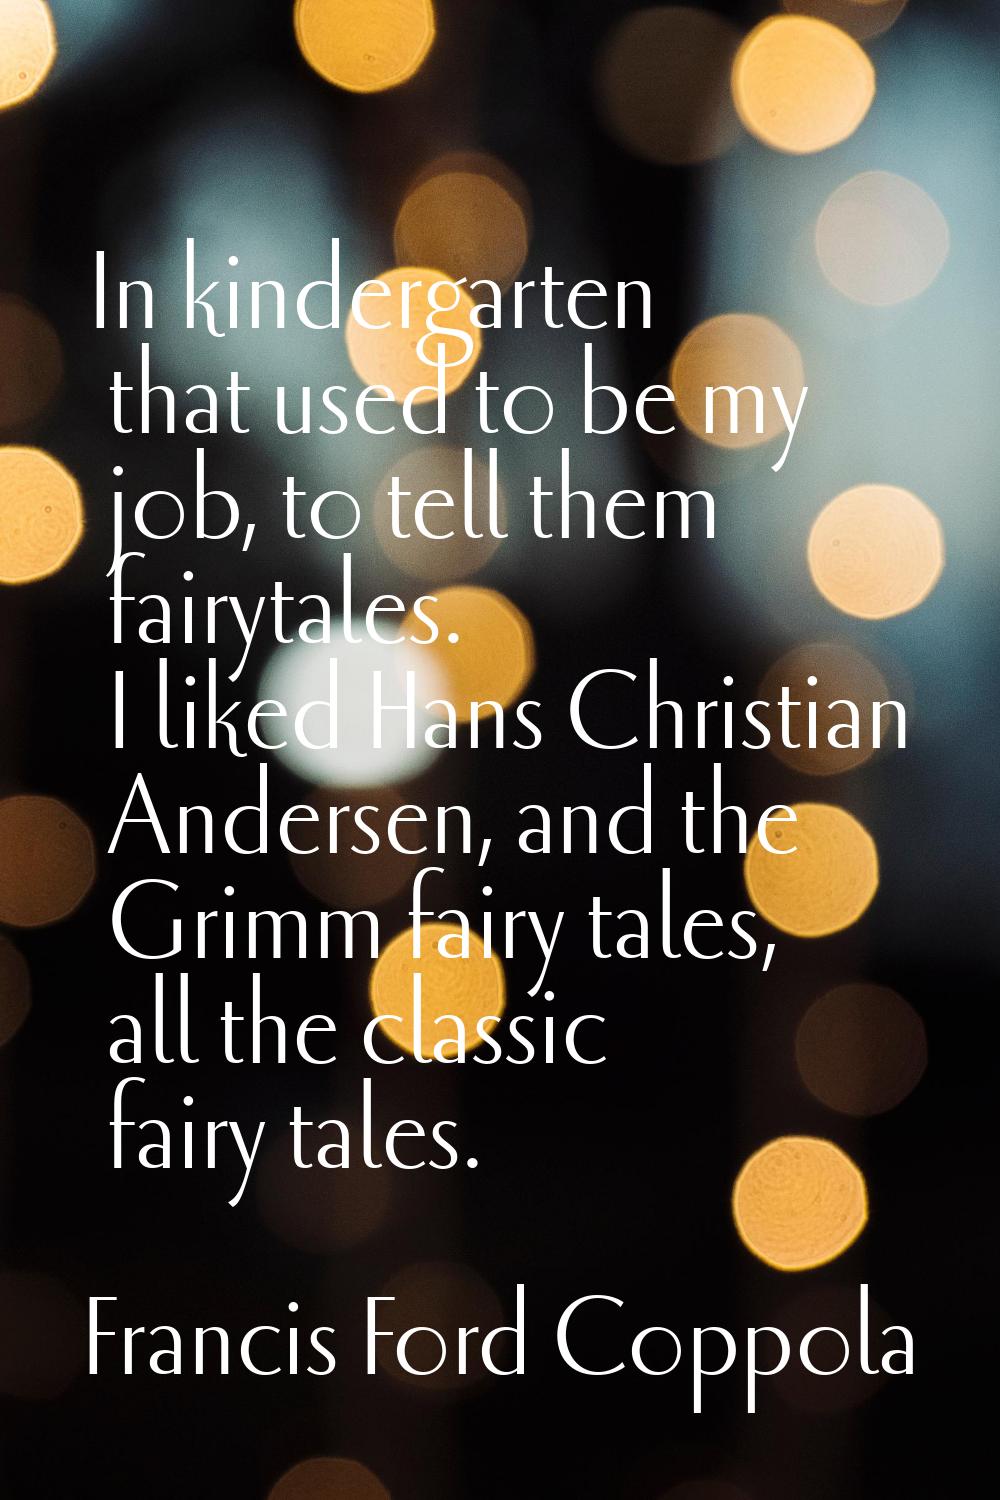 In kindergarten that used to be my job, to tell them fairytales. I liked Hans Christian Andersen, a